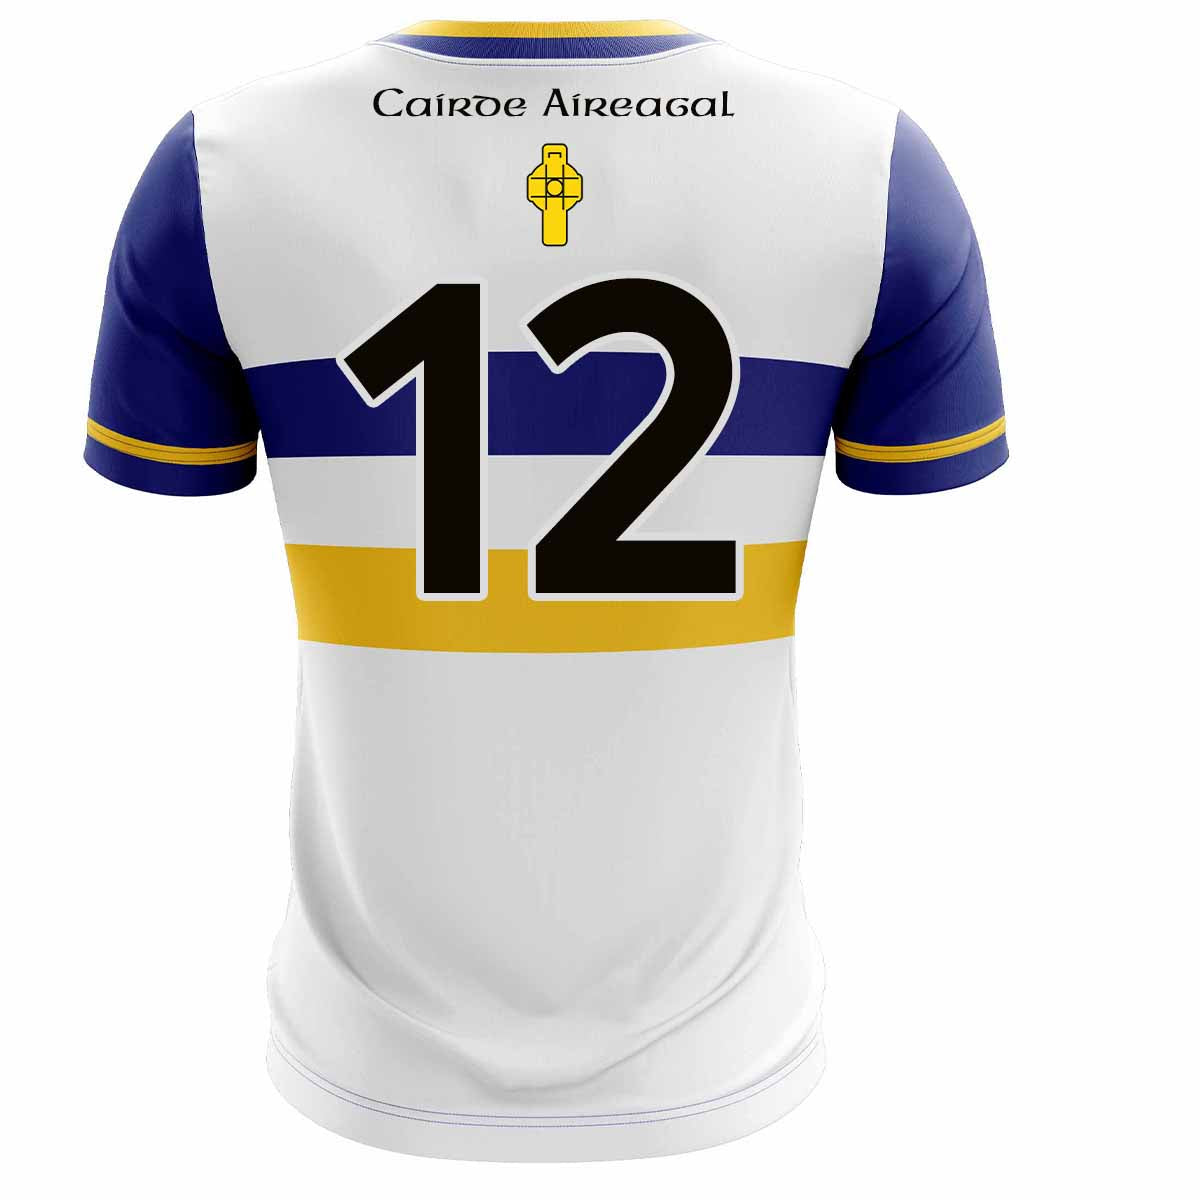 Mc Keever Errigal Ciaran GAA Numbered Home Jersey - Adult - White/Royal Player Fit